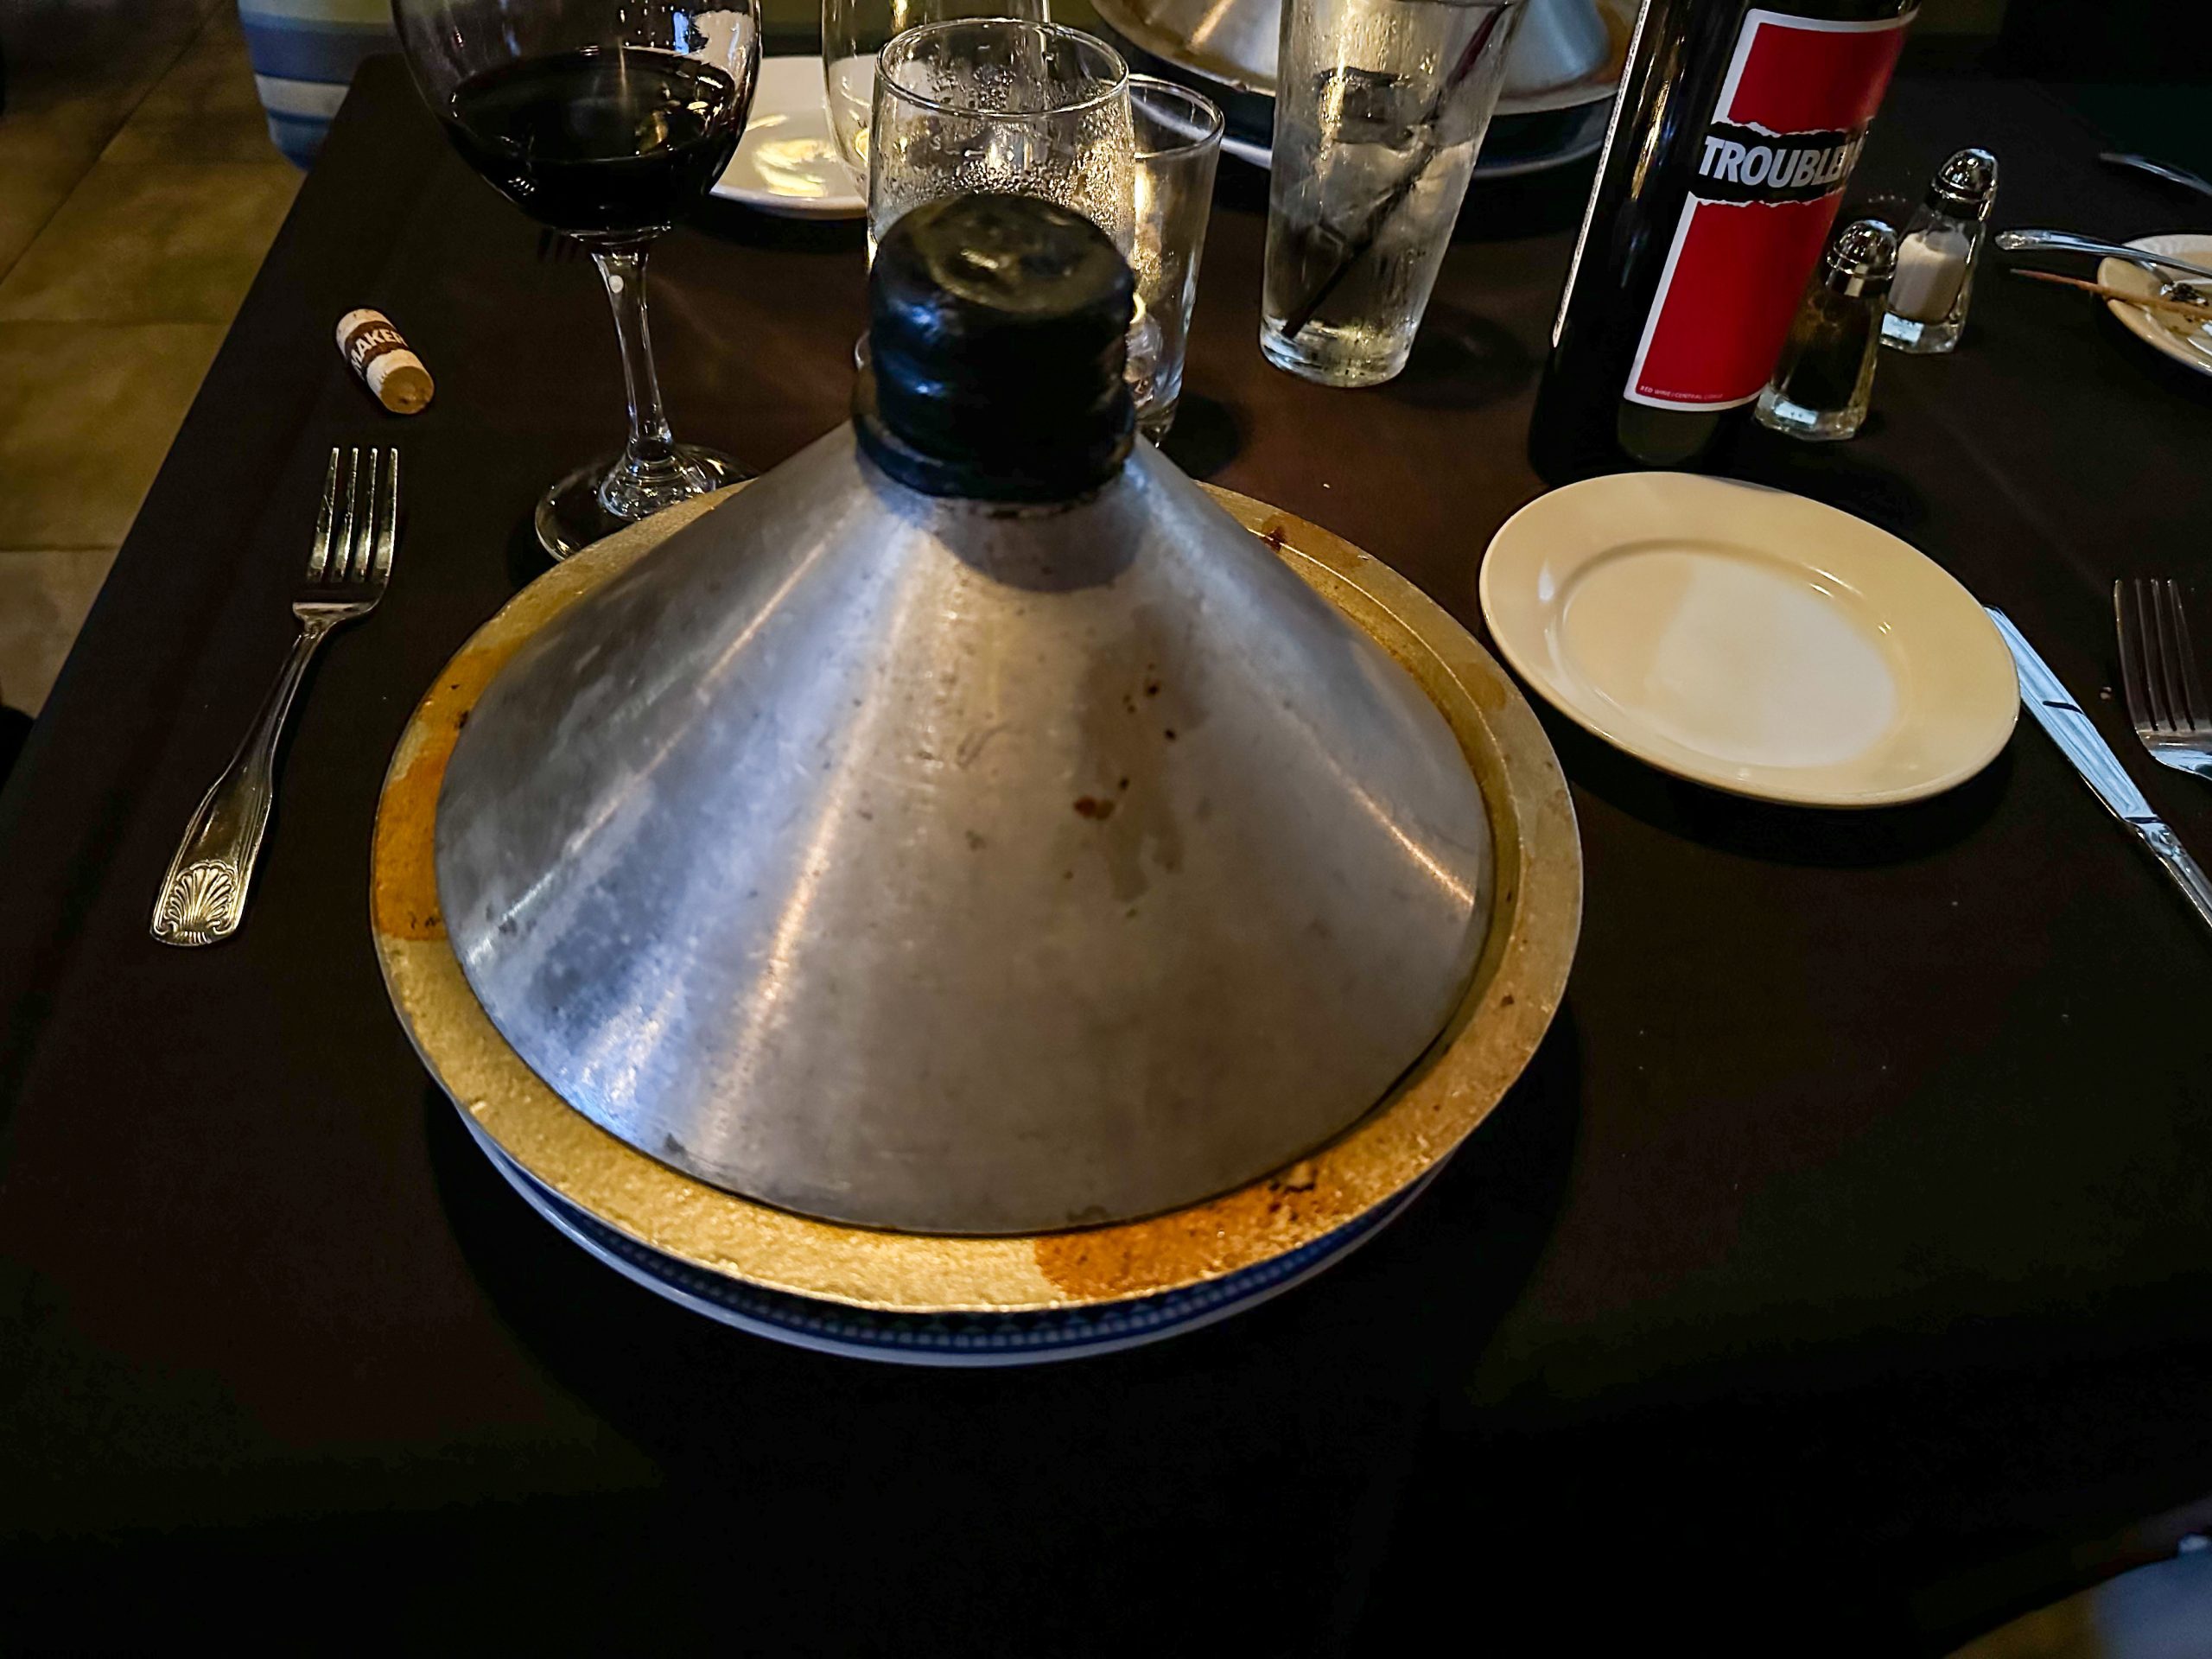 All tagines on the menu are served in a traditional tagine